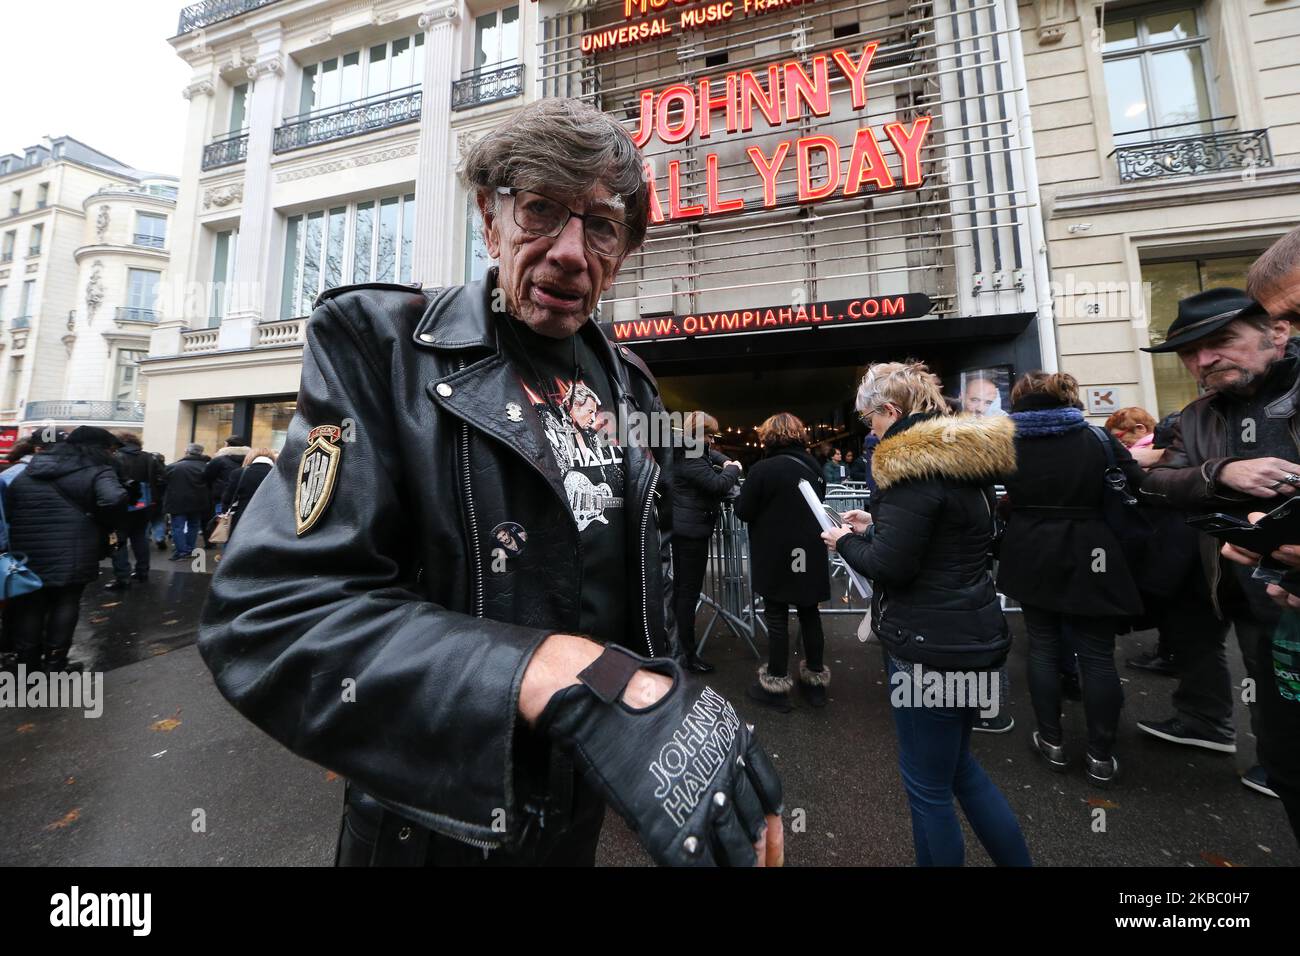 A fan of the French singer Johnny Hallyday poses in front of the Olympia Hall in Paris where a tribute was paid to this legend of French music on Sunday, December 1, 2019, almost two years after his death. For the occasion, the letters of his name shone in red in the neon lights of the famous facade of the Olympia. Johnny Hallyday died at the age of 74 on the night of December 5th 2017 after a battle with lung cancer. (Photo by Michel Stoupak/NurPhoto) Stock Photo